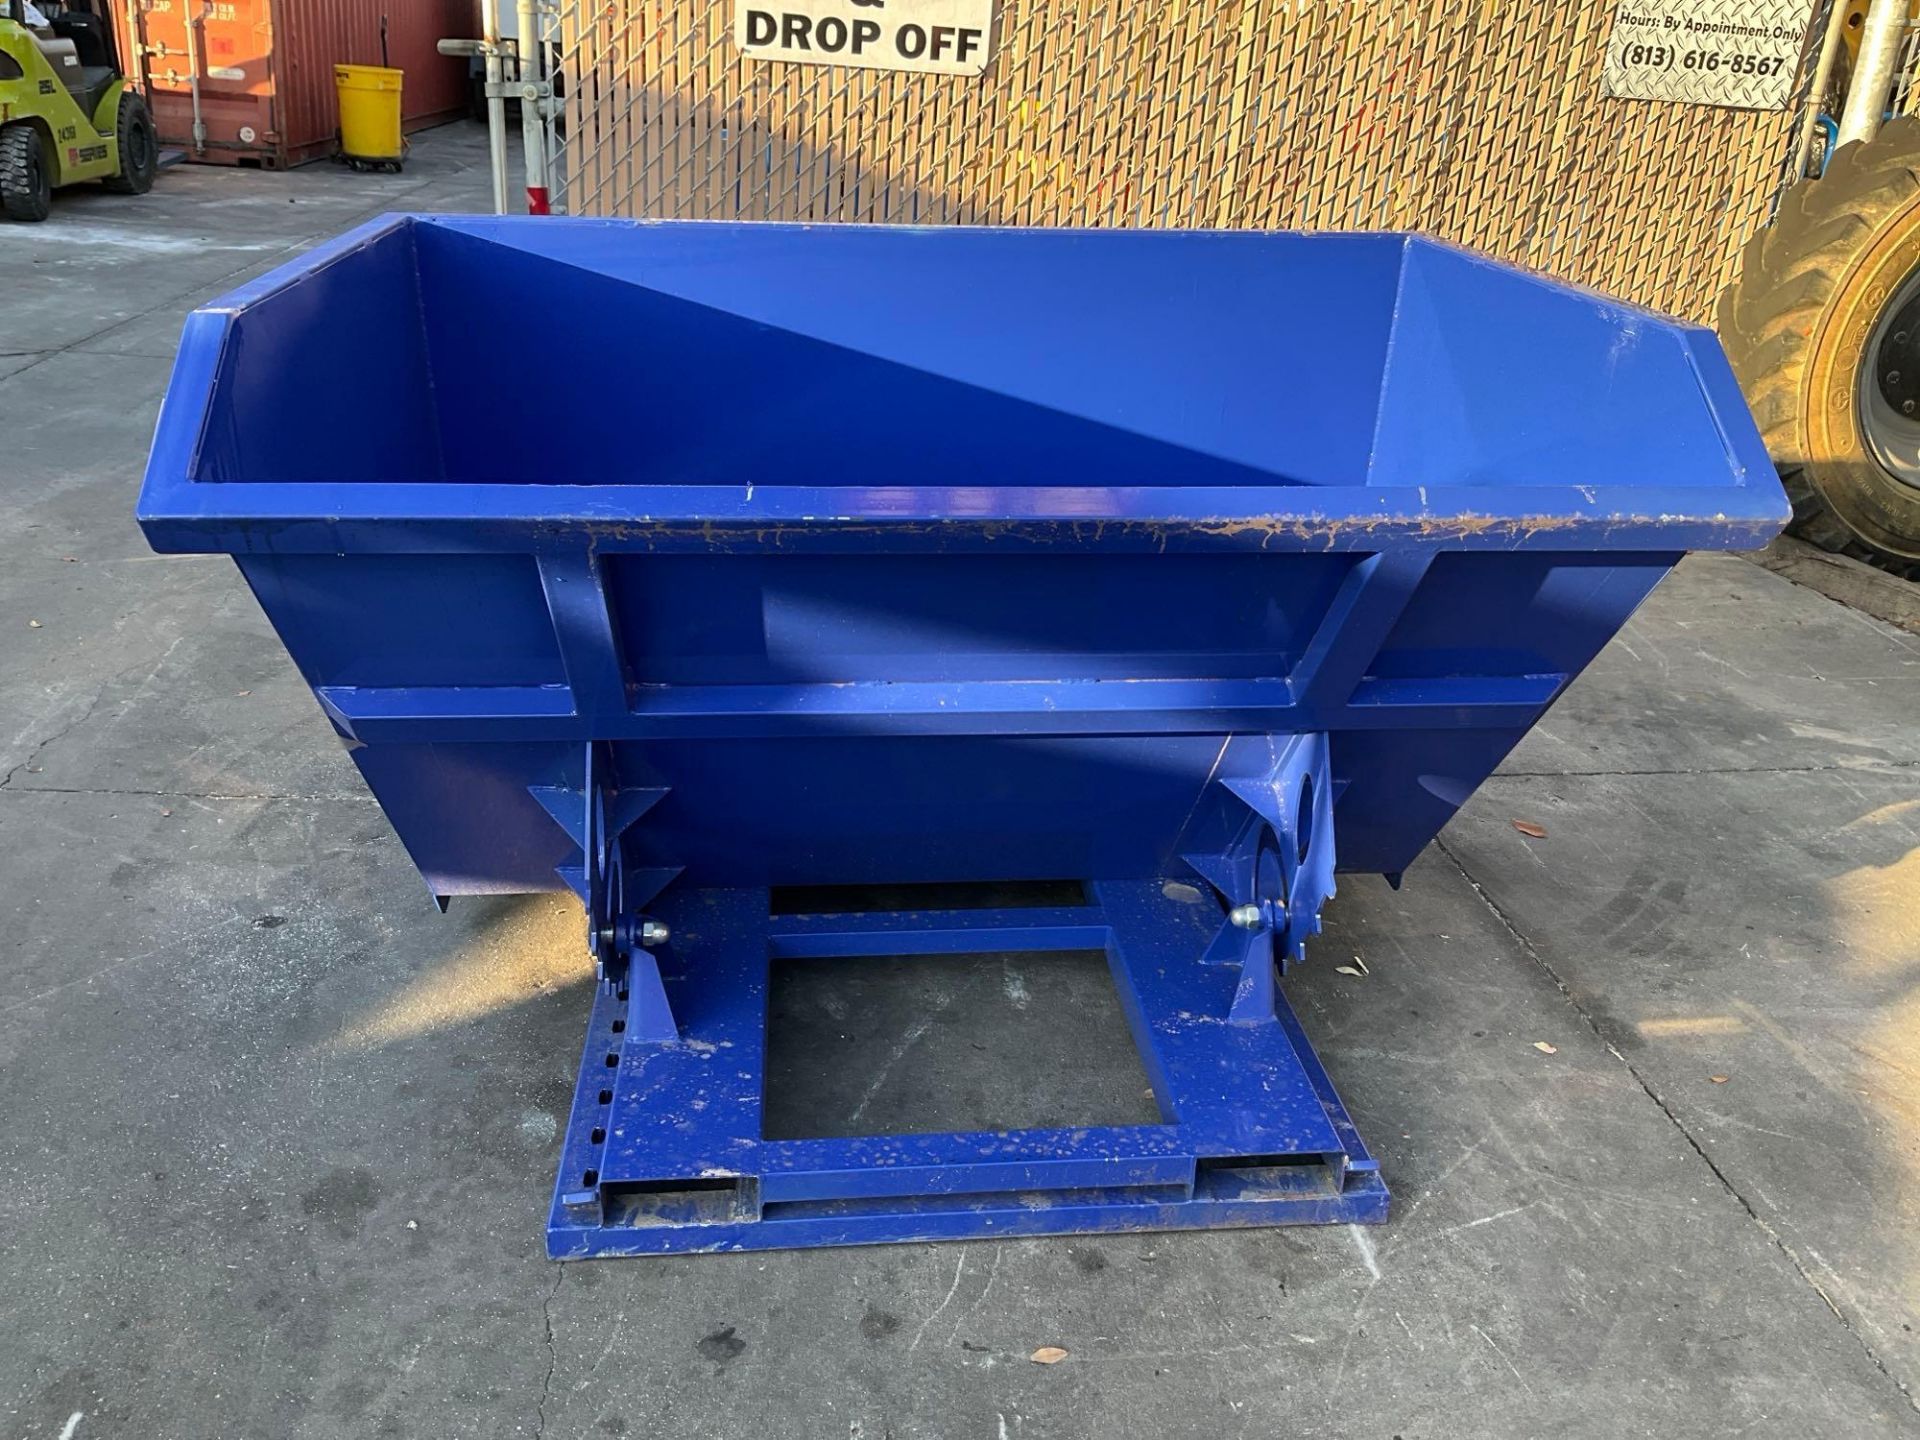 UNUSED 1.5 YARD SELF DUMPING HOPPER WITH FORK POCKETS - Image 2 of 4